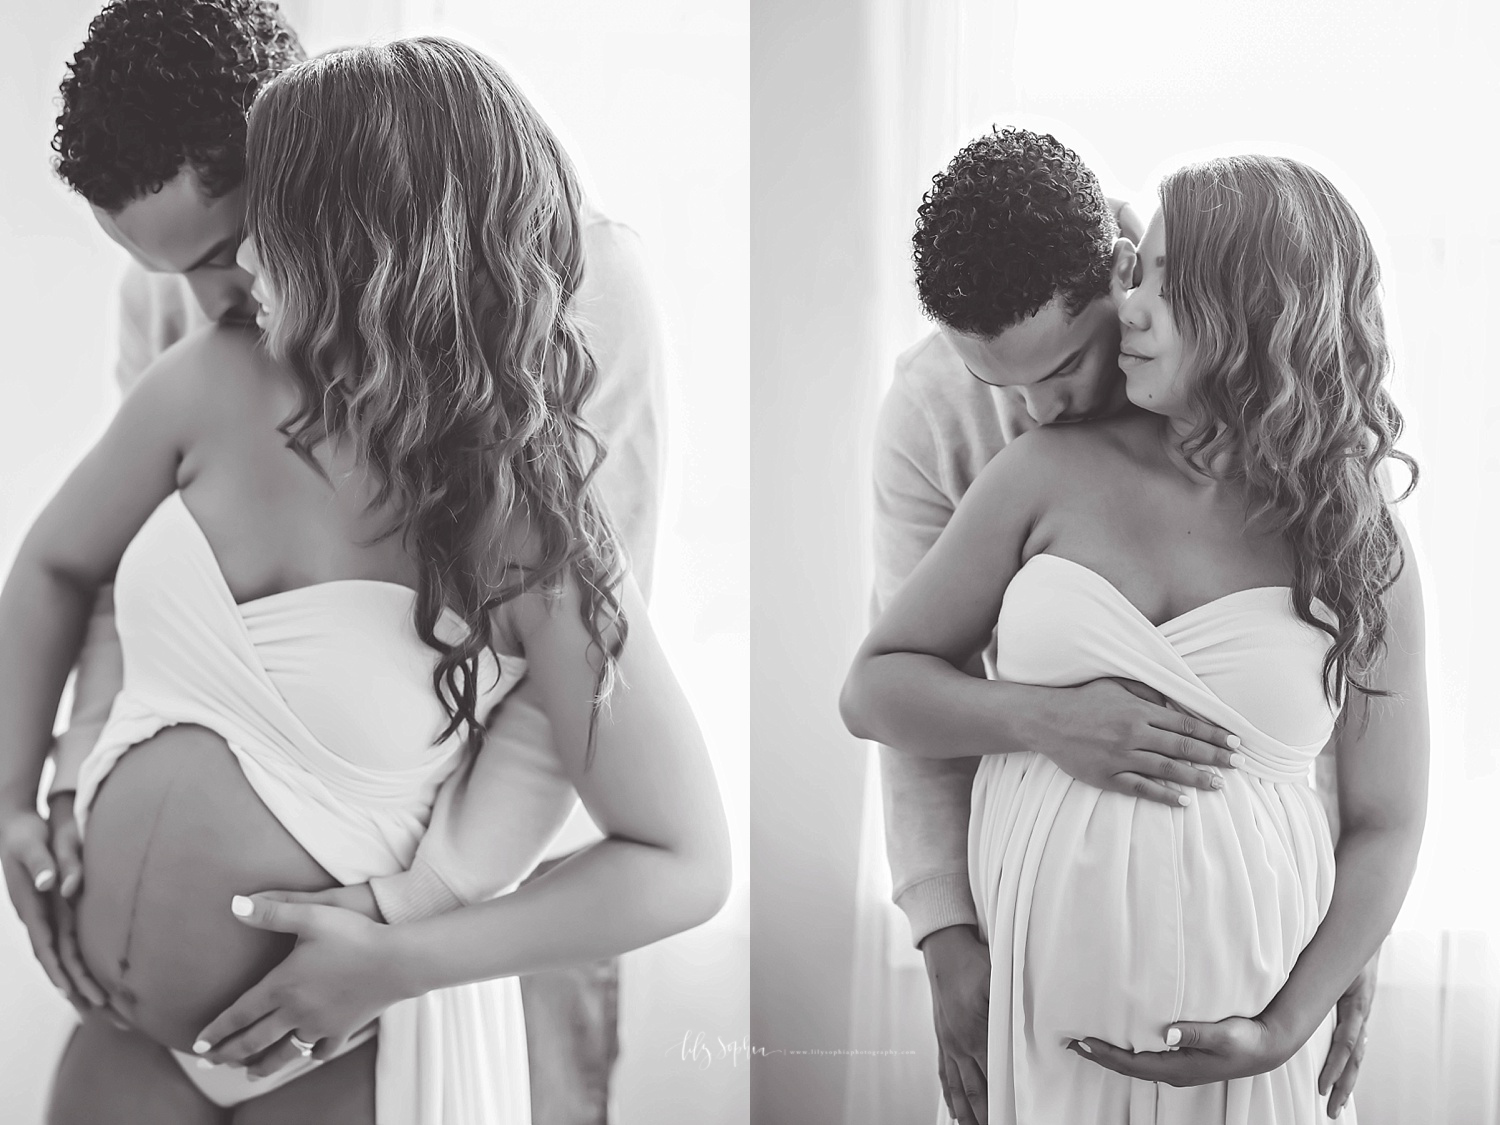  Side by side, black and white images of a African American pregnant woman and her husband. In the first image, she is wearing a split front dress and they are holding her belly. &nbsp;In the second image her husband is kissing her should while she h